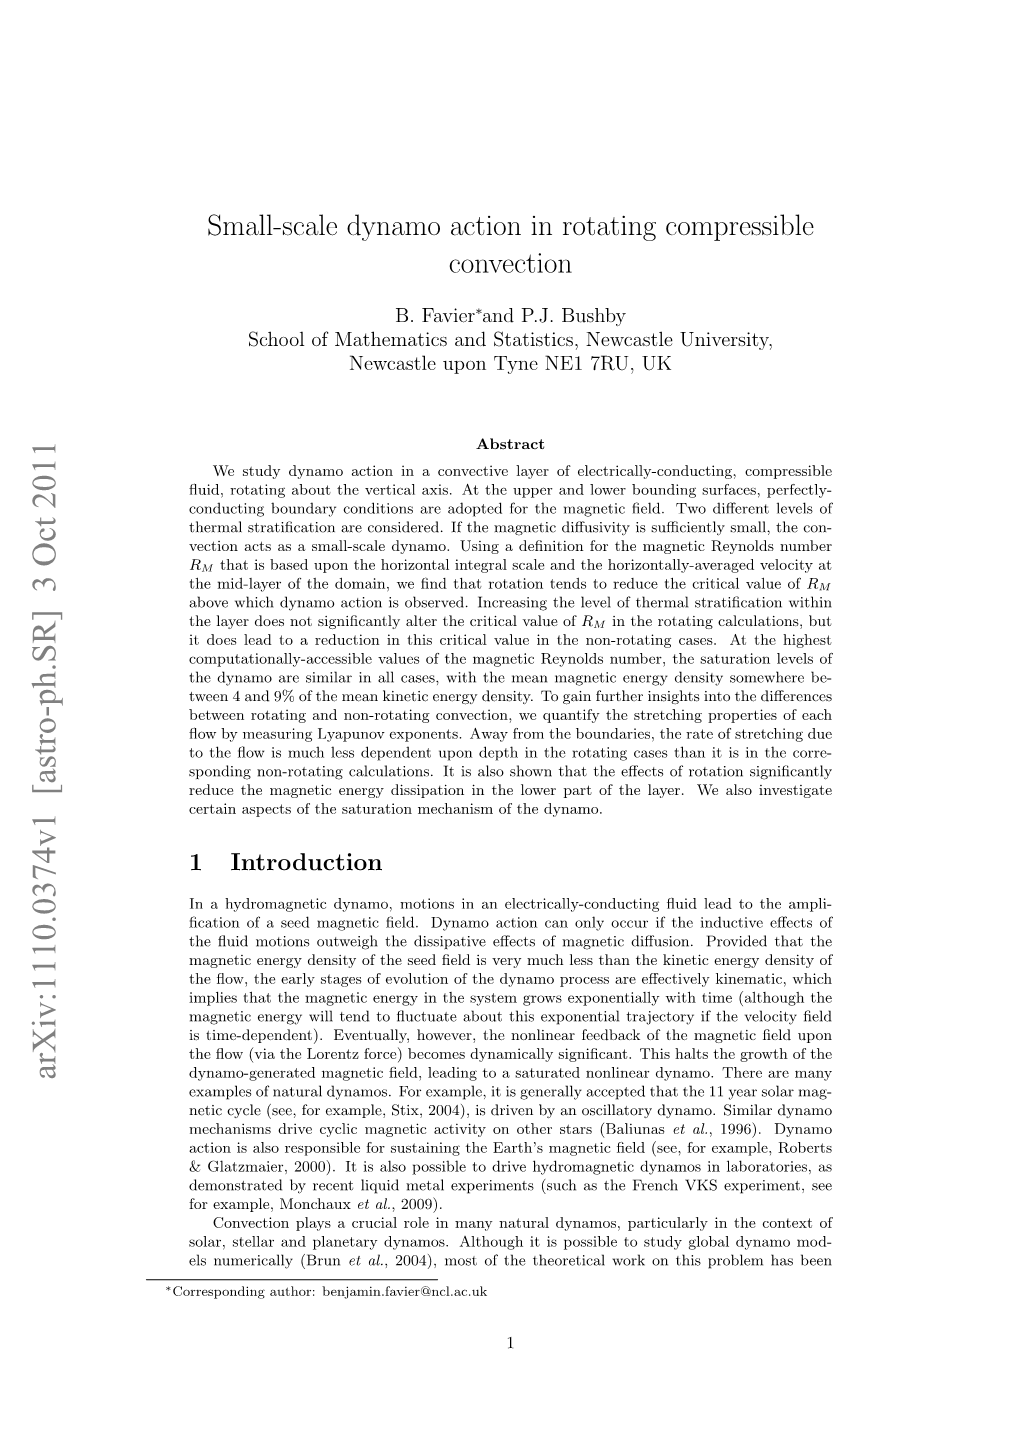 Small-Scale Dynamo Action in Rotating Compressible Convection